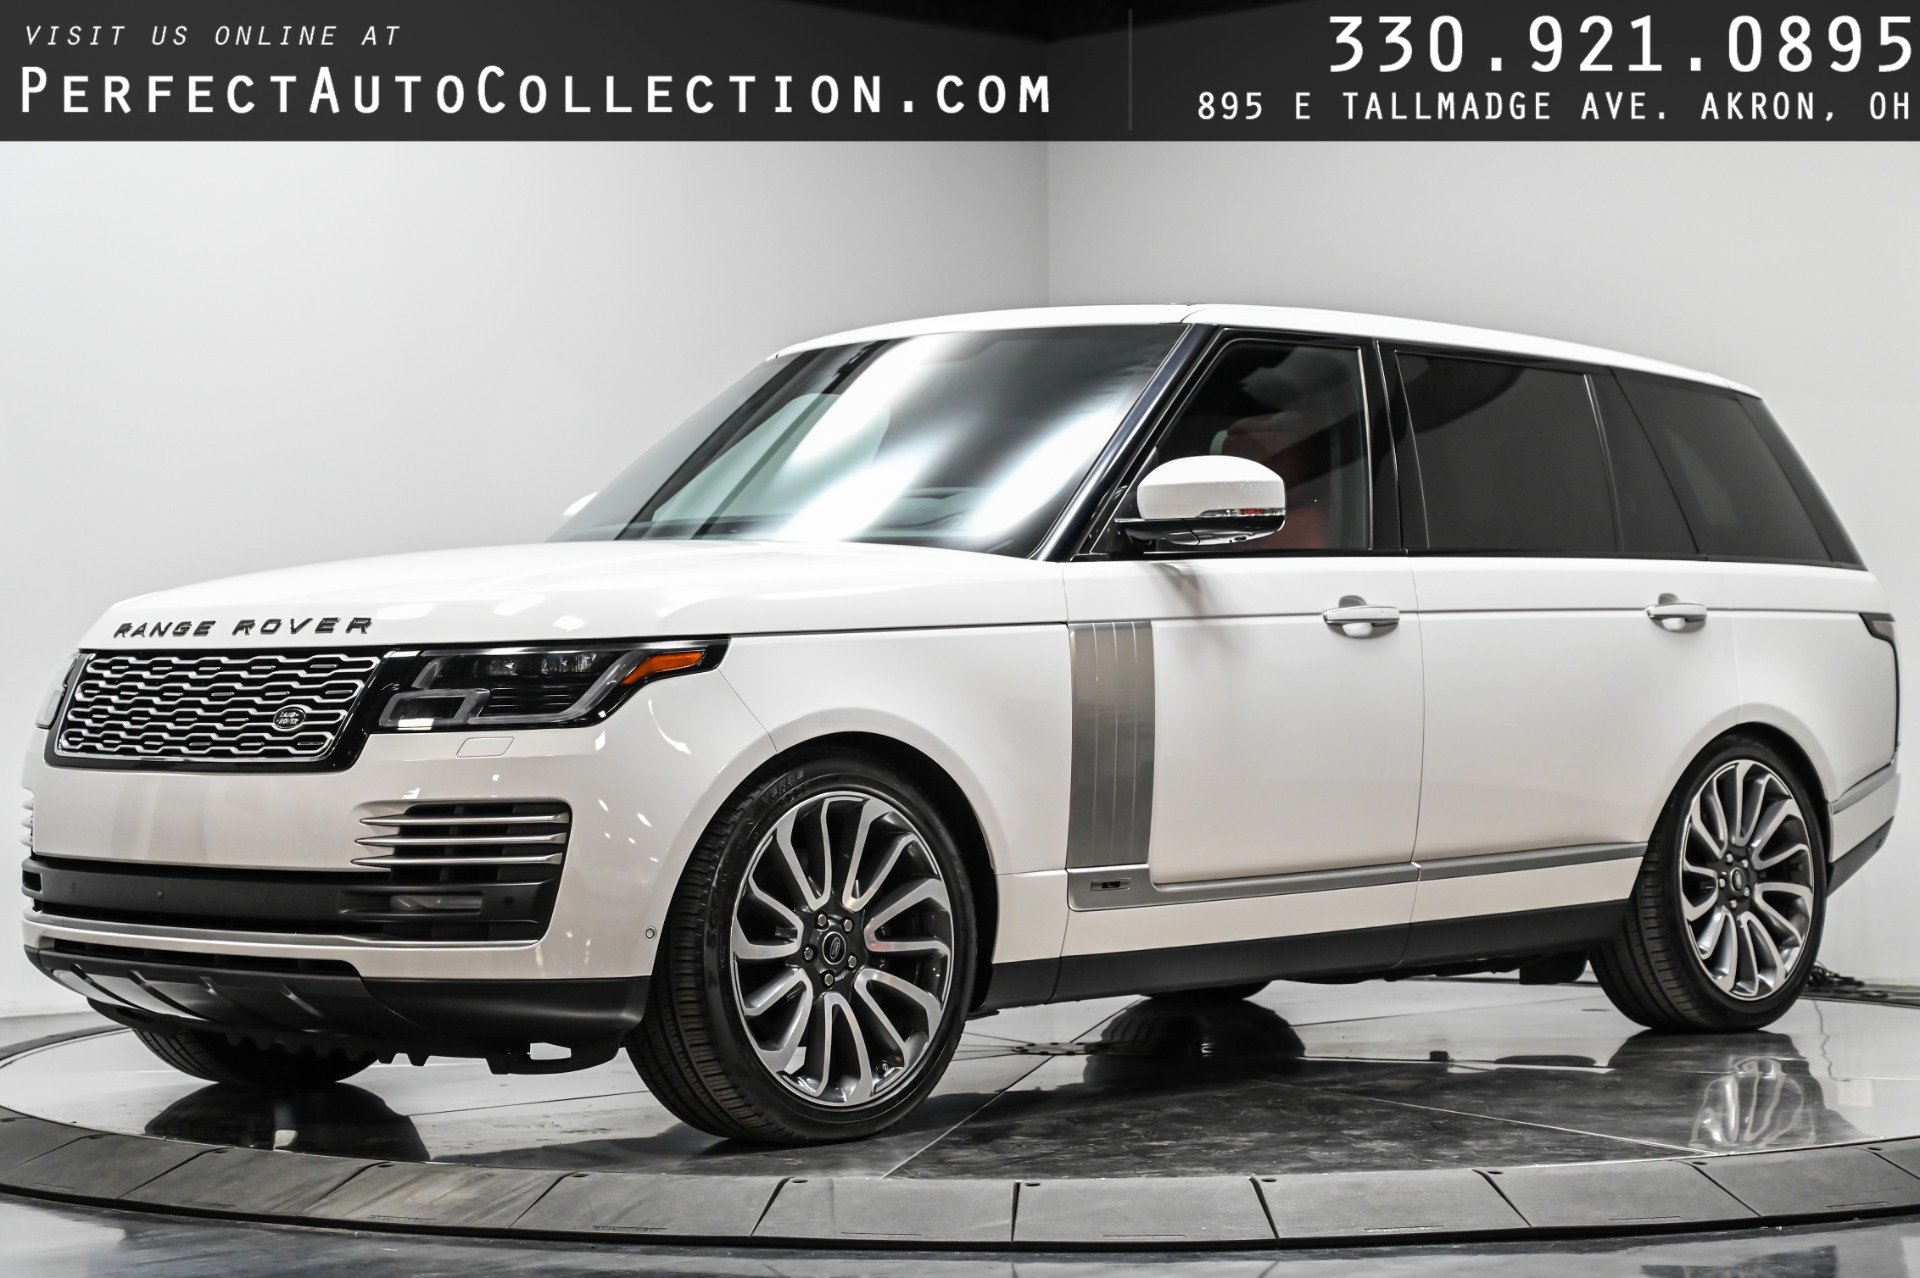 Used 2020 Land Rover Range Rover Autobiography LWB For Sale ($85,995)